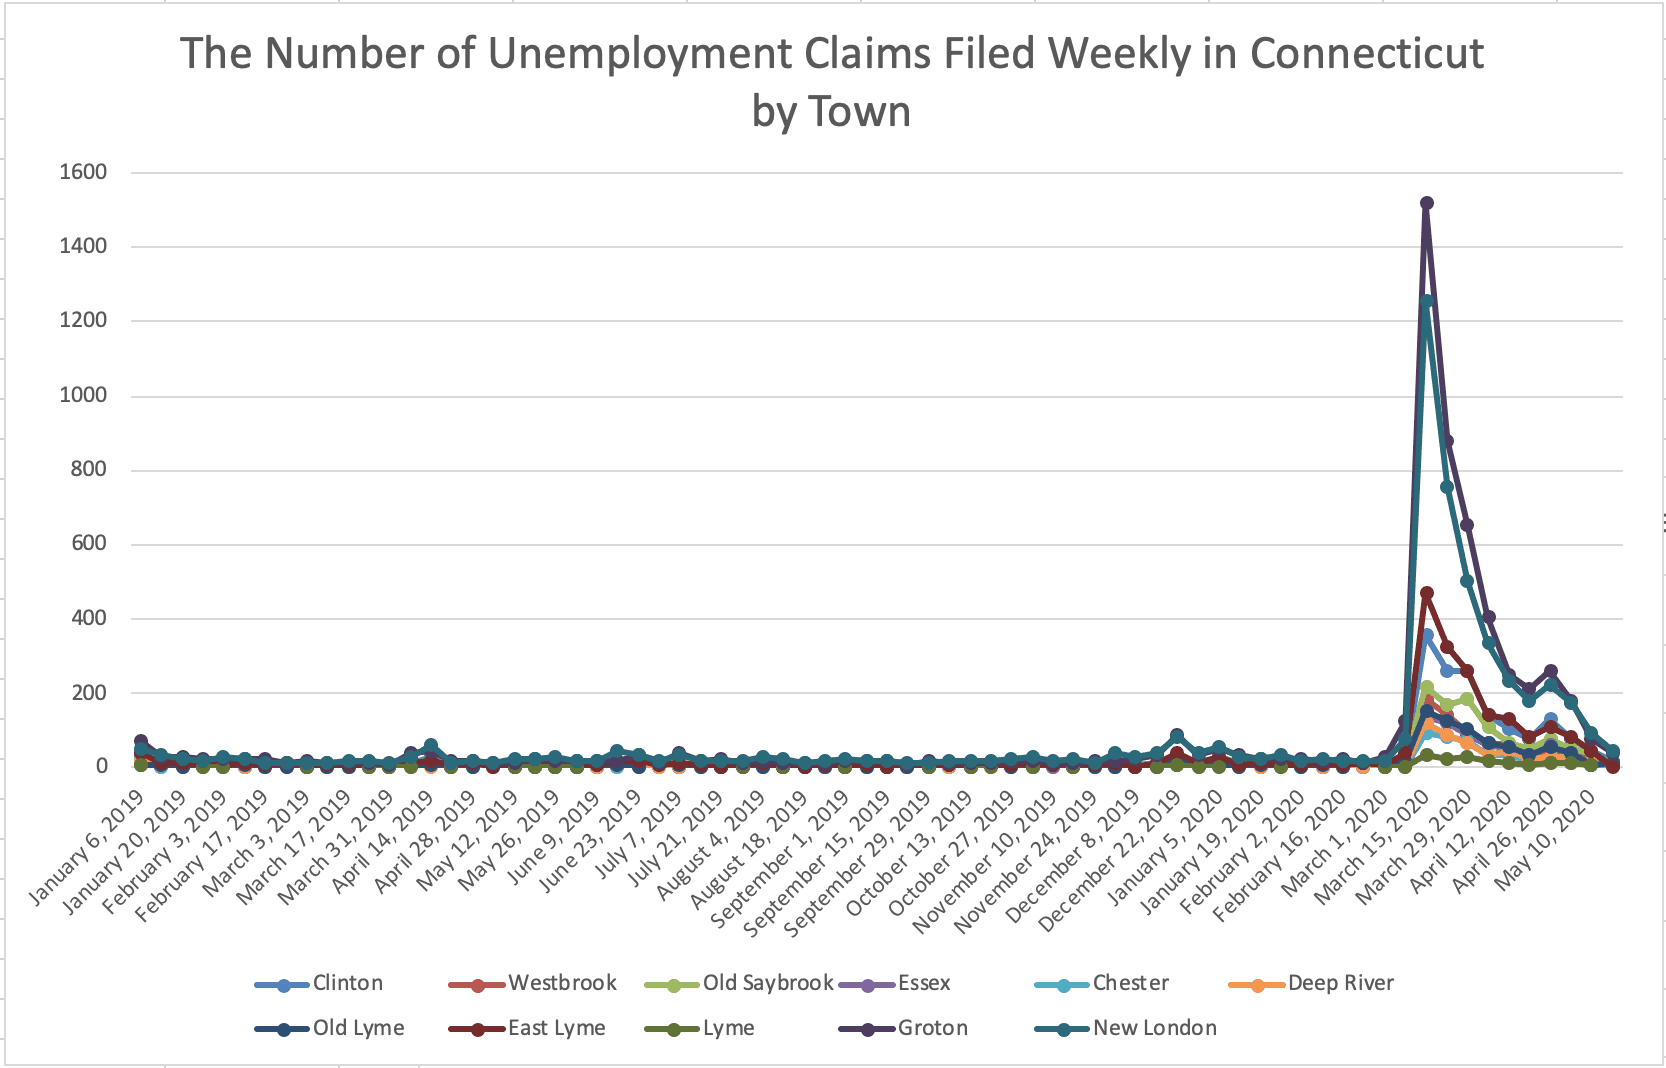 Unemployment by the Numbers - The Connecticut Examiner